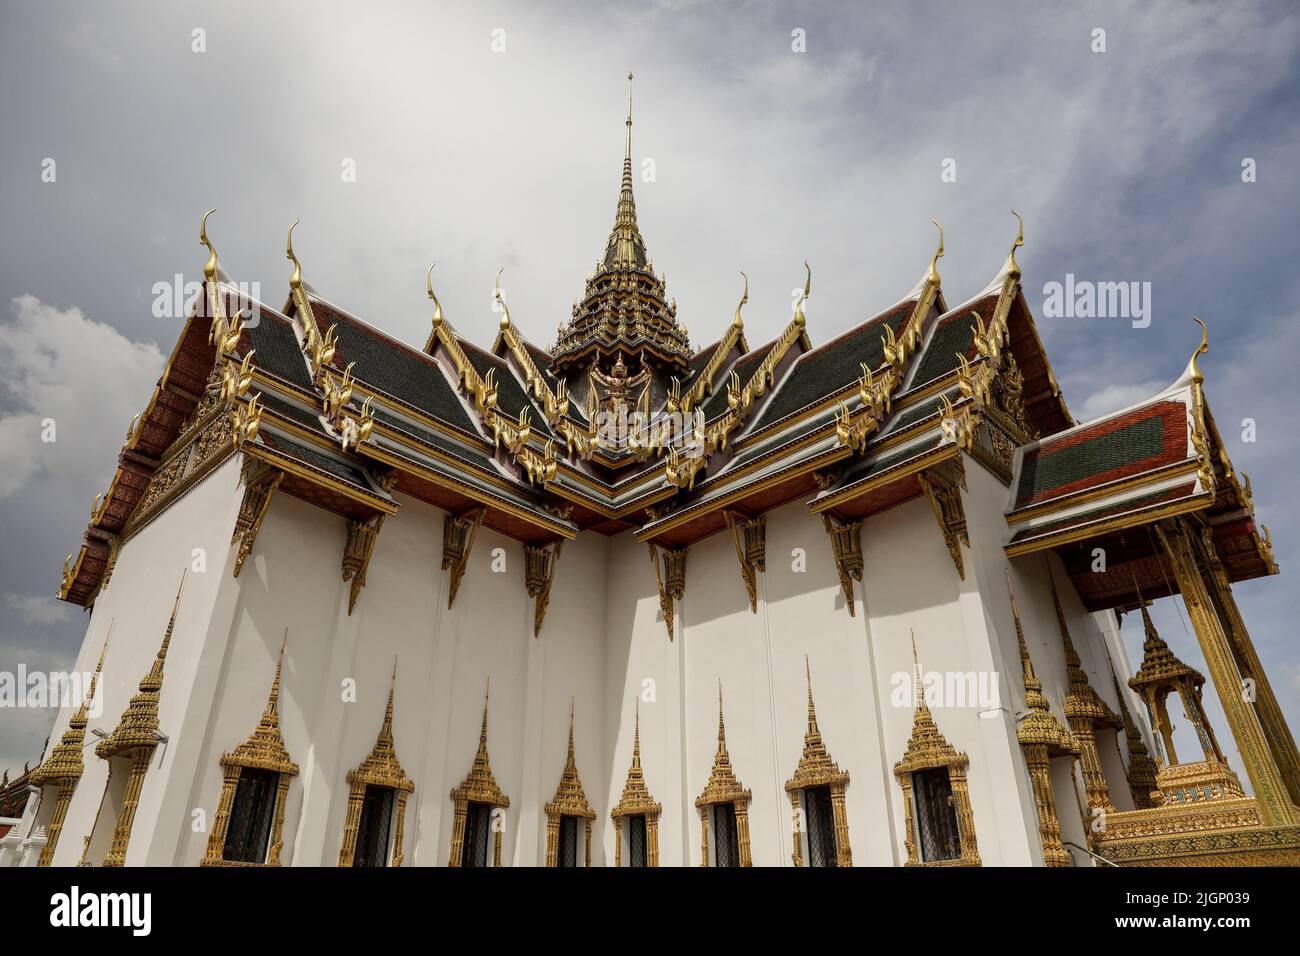 A temple inside the Grand Palace in Bangkok. Thailand continues to ease restrictions to boost its tourism despite the a global pandemic and new waves of coronavirus cases. Thailand. Stock Photo